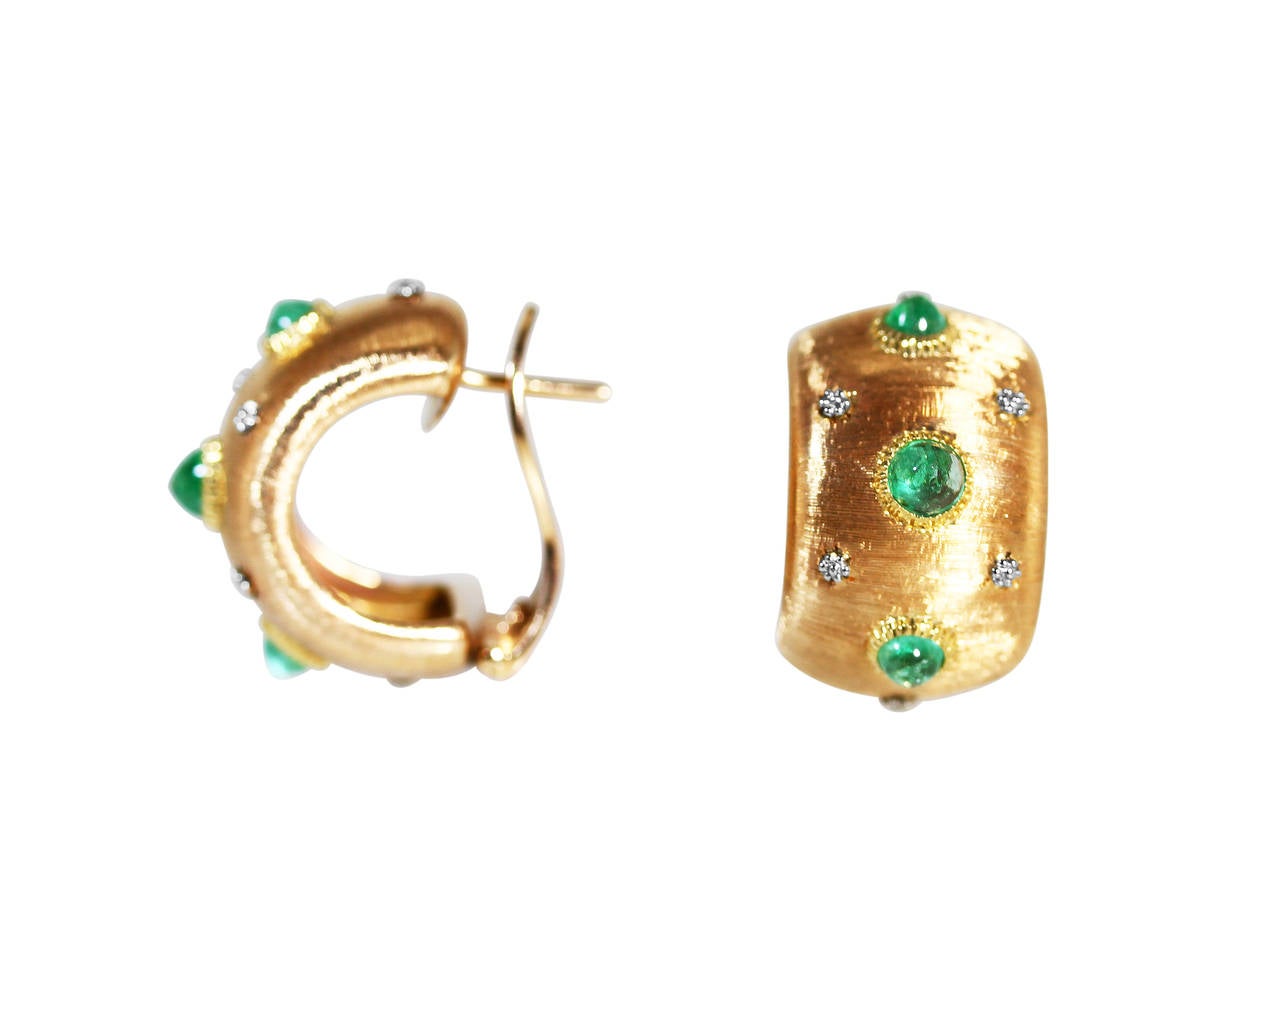 A pair of 18 karat yellow gold and cabochon emerald earclips by Buccellati, Italy, designed as halfhoops of curved form with brushed gold accents, set with 6 cabochon emeralds weighing approximately 1.50 carats, gross weight 12.2 grams, measuring